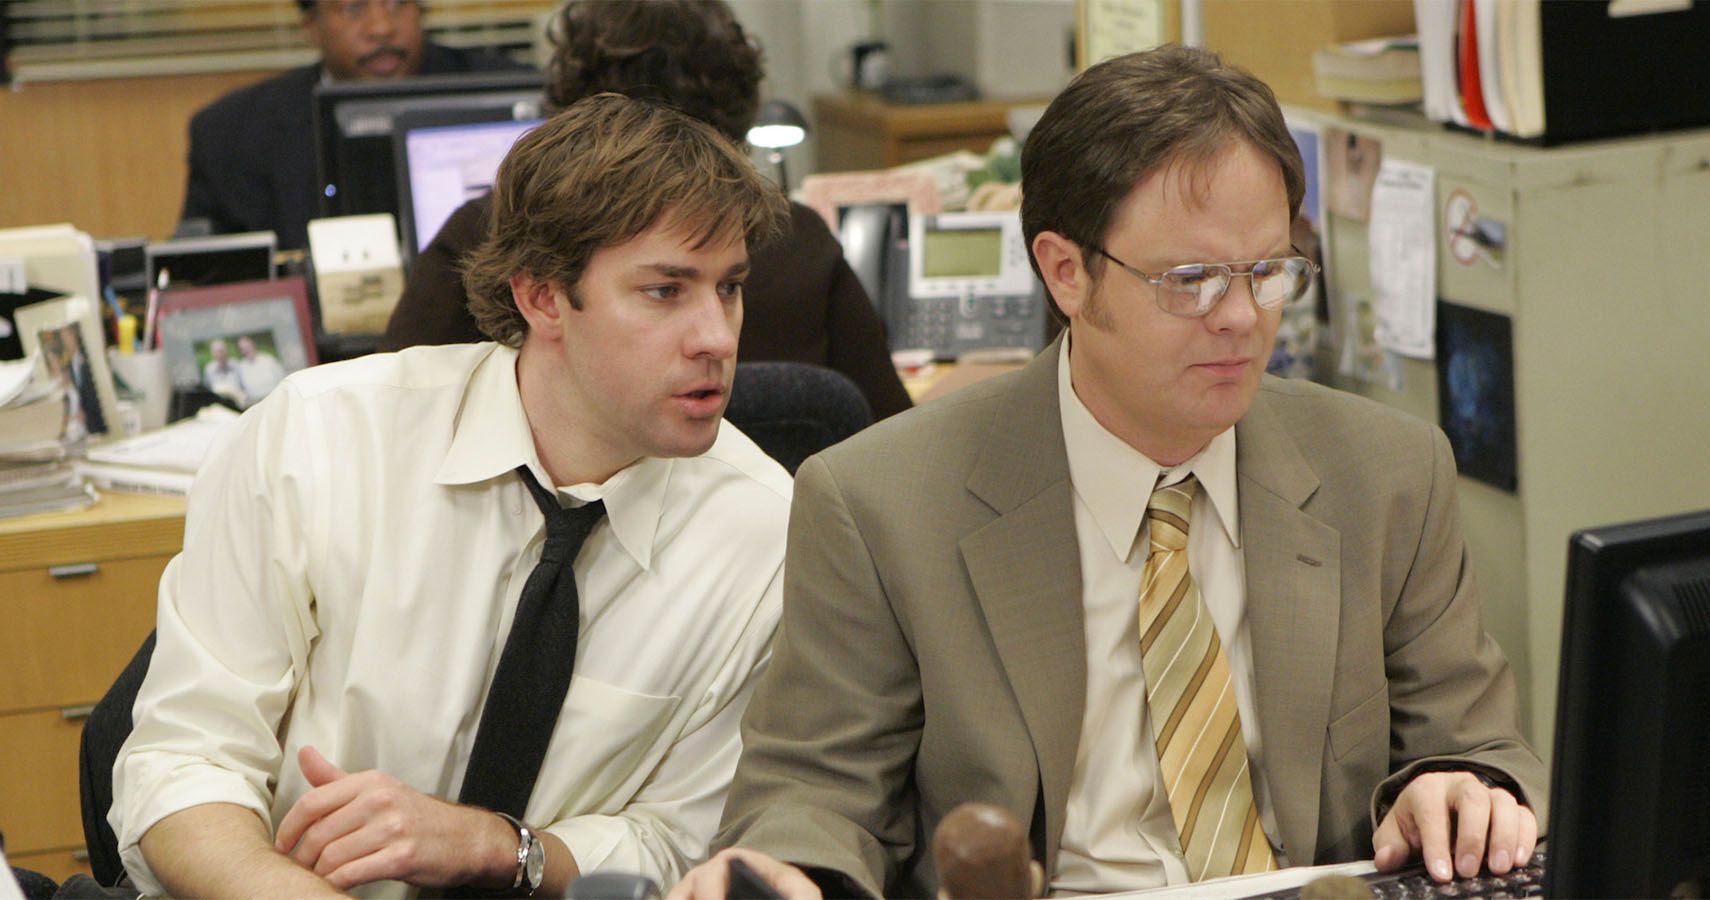 The Office: 10 Best Opening Scenes Ranked